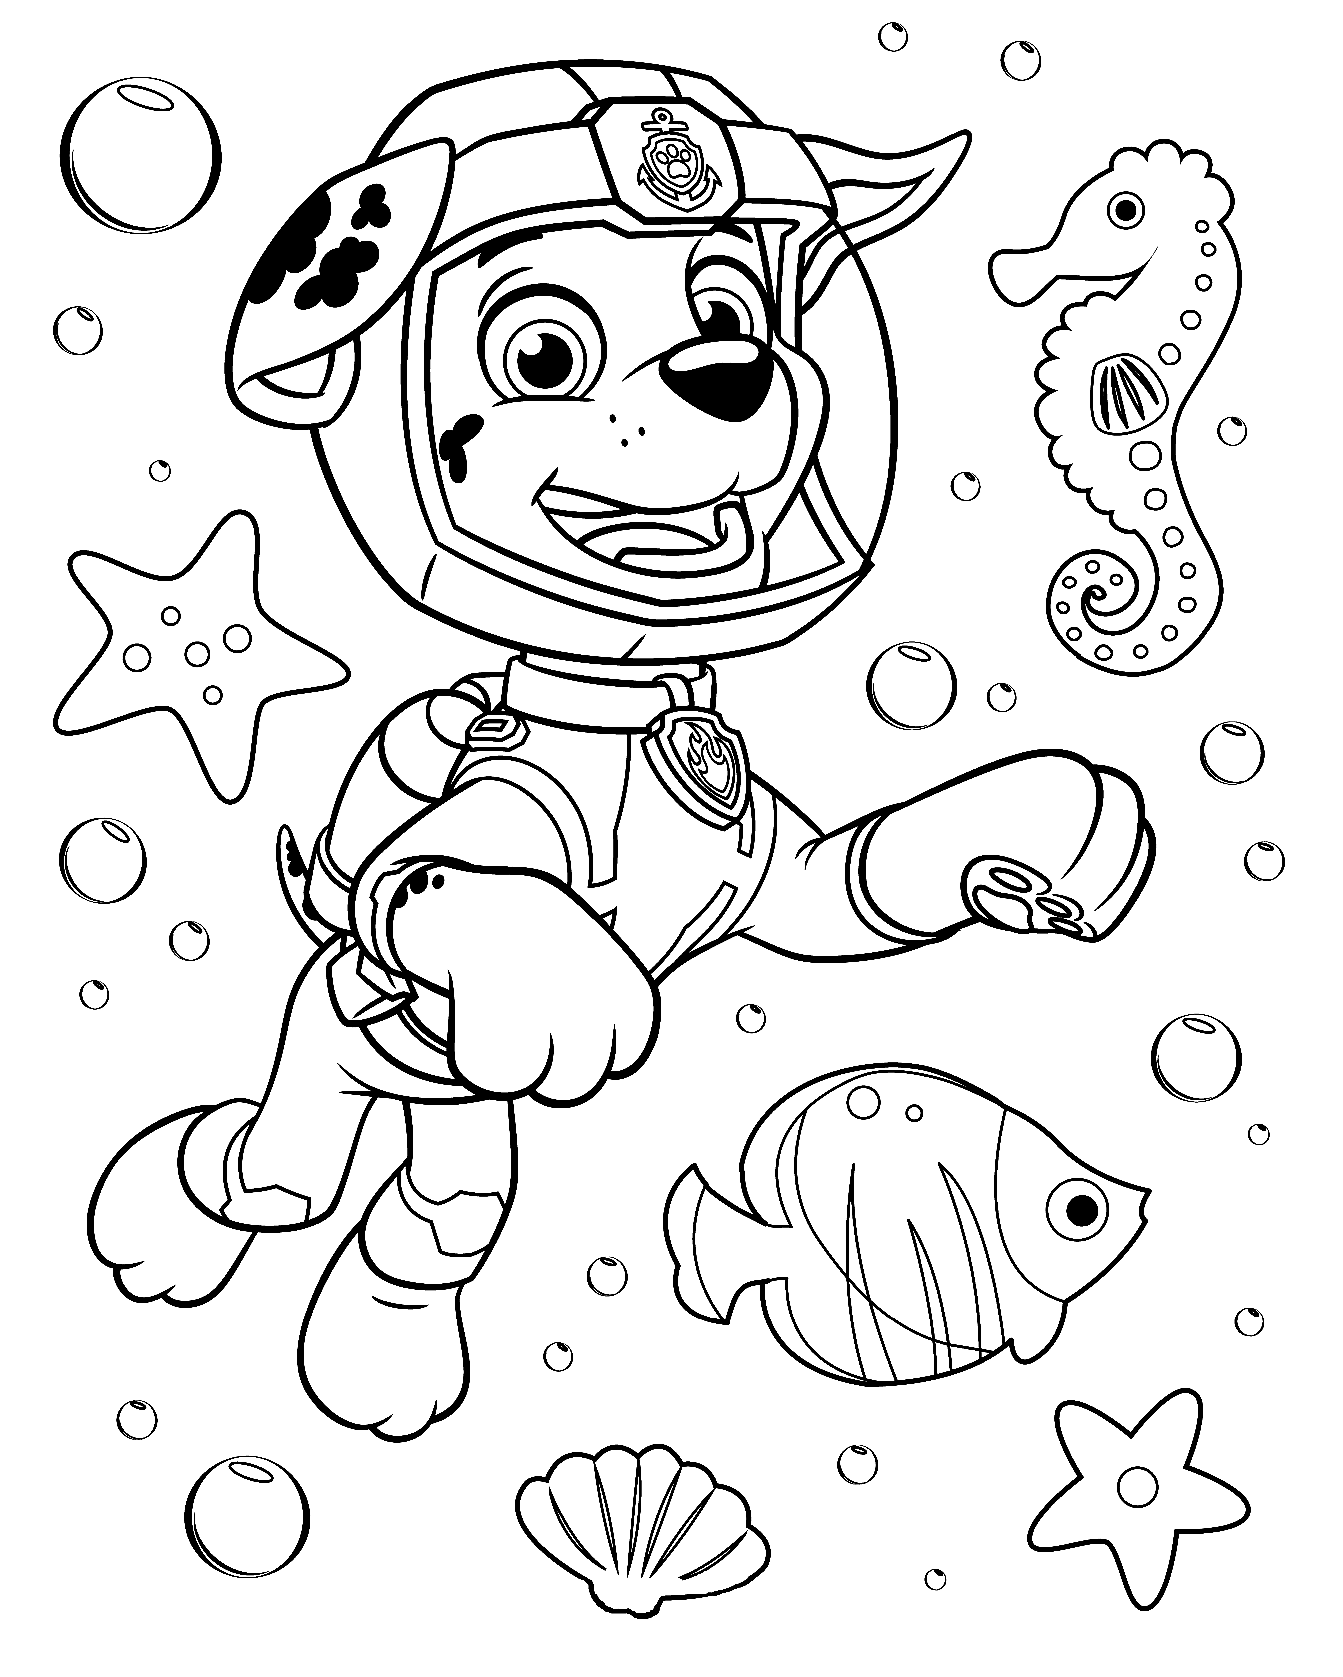 Paw Patrol Marshall Underwater Coloring Page